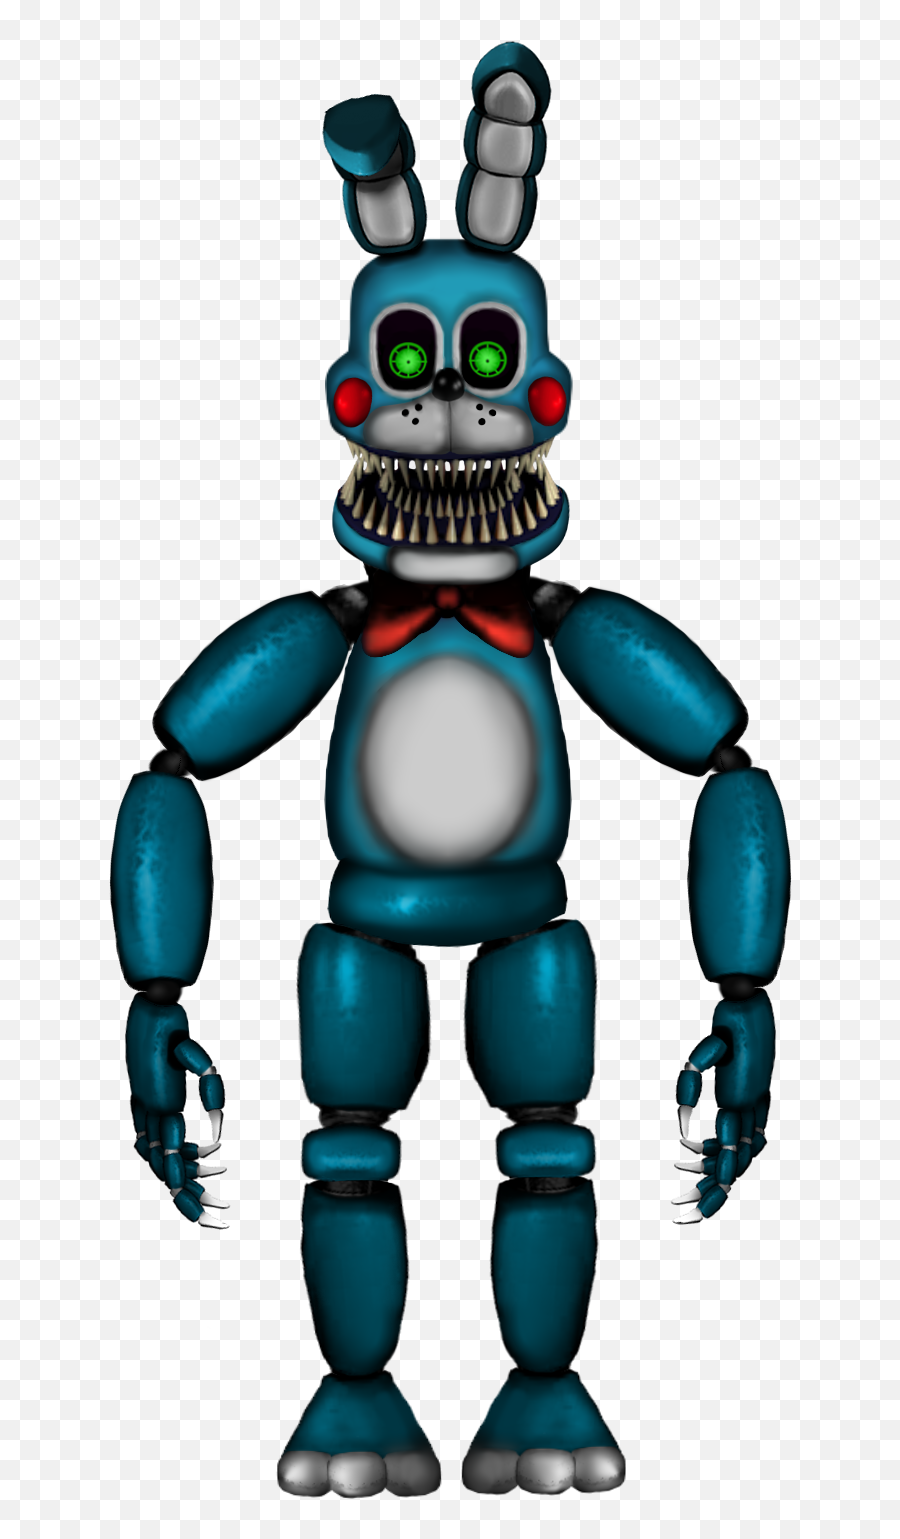 Transparent Version Of My Nightmare Toy Bonnie - Album On Imgur Nightmare Toy Bonnie Transparent Png,Bonnie Png